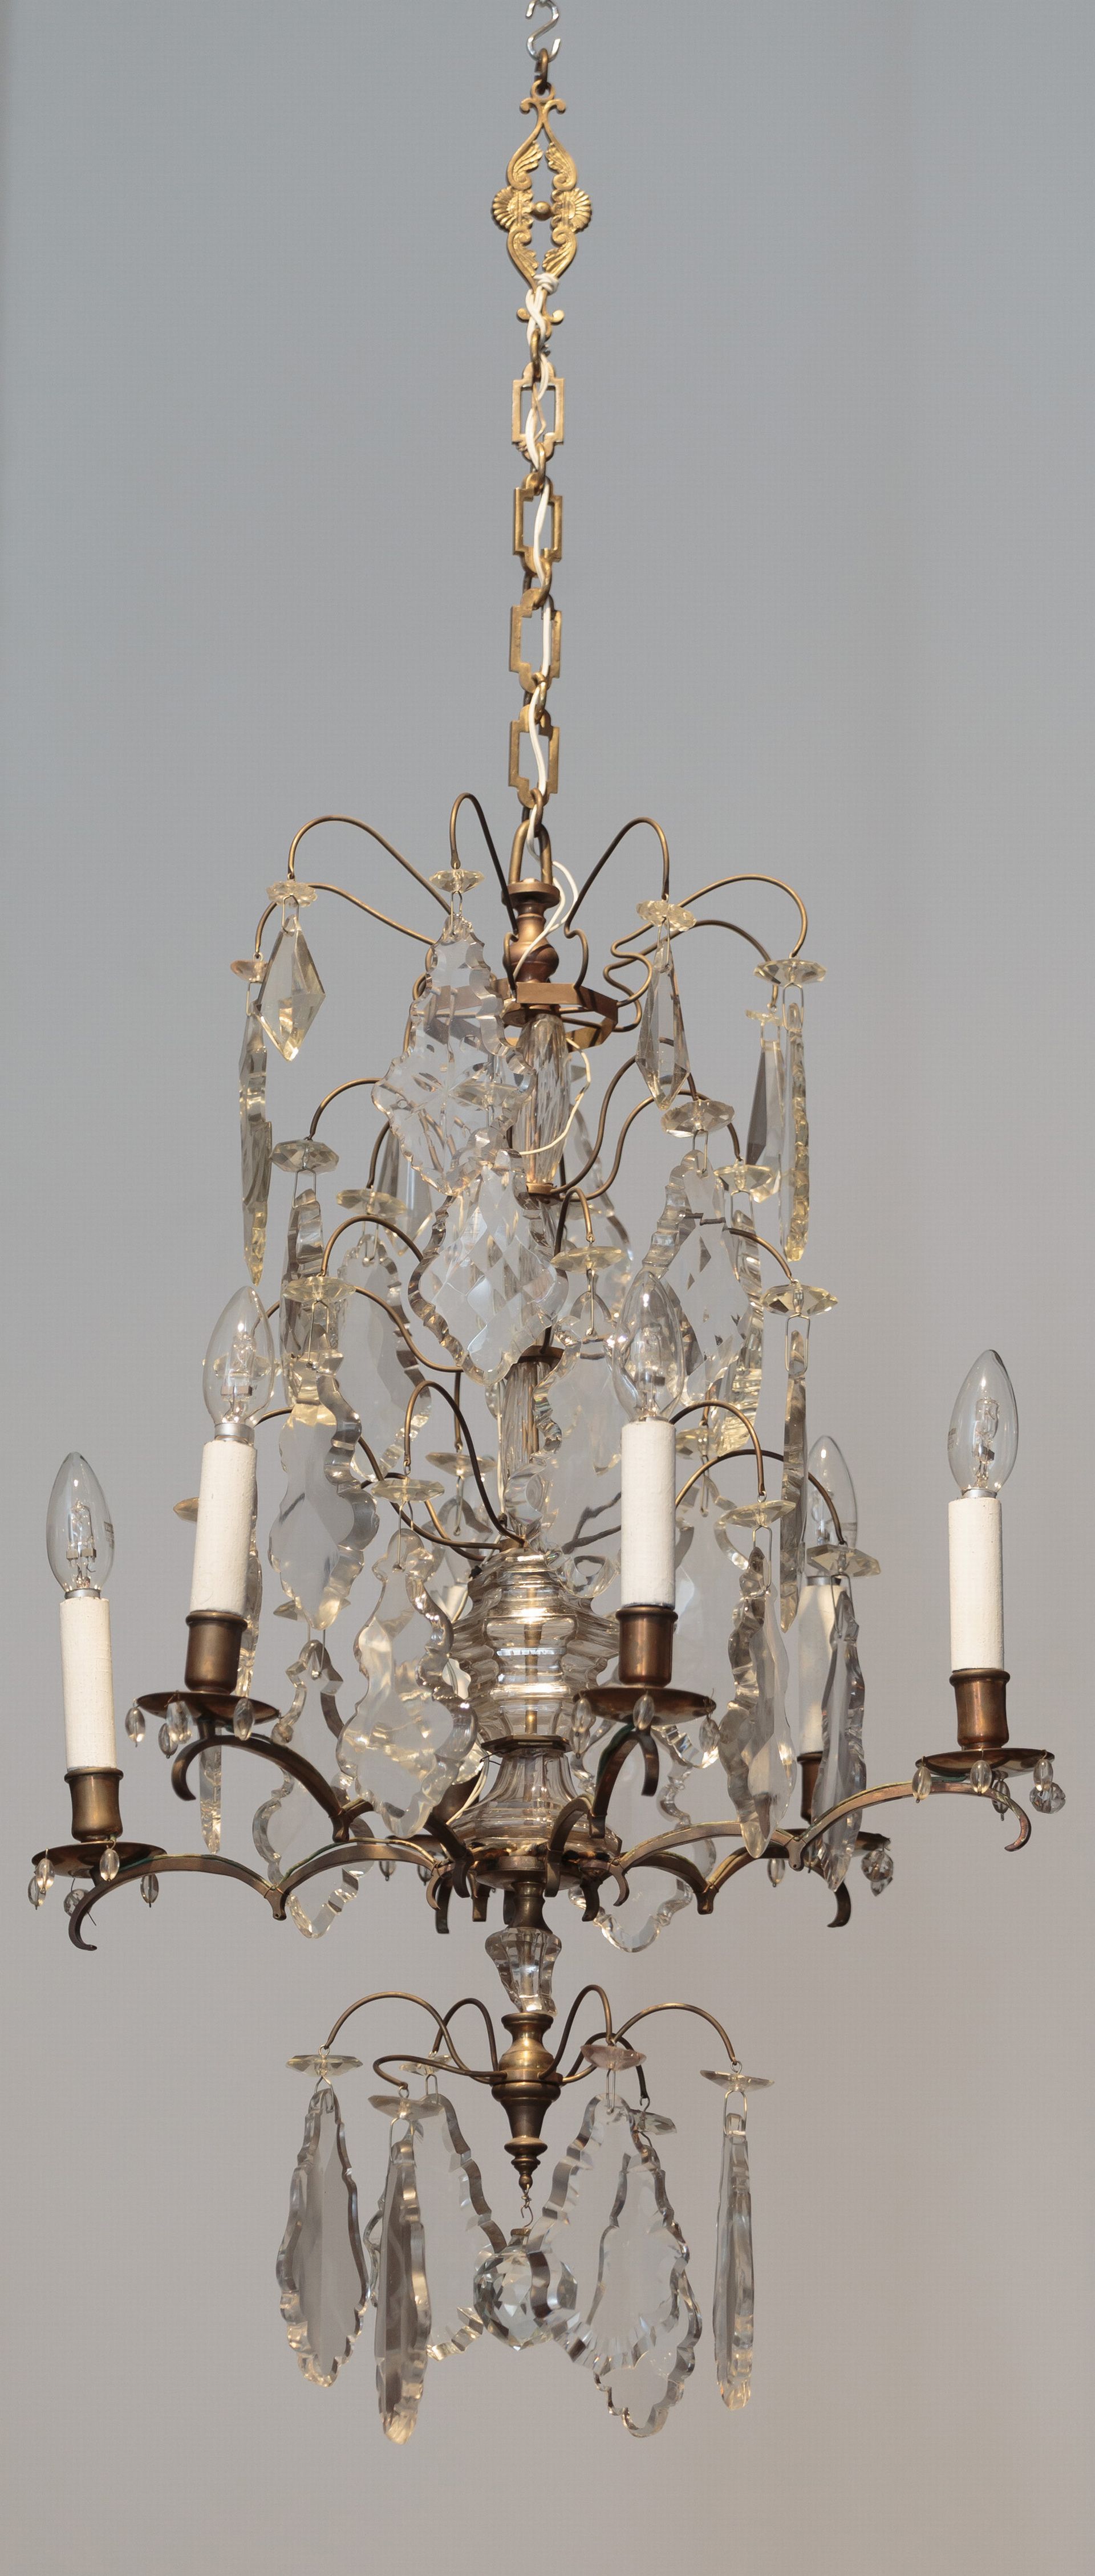 Chandelier, 1887–1911, Lithuanian National Museum of Art, TM-840. Photo by Tomas Kapočius, 2017